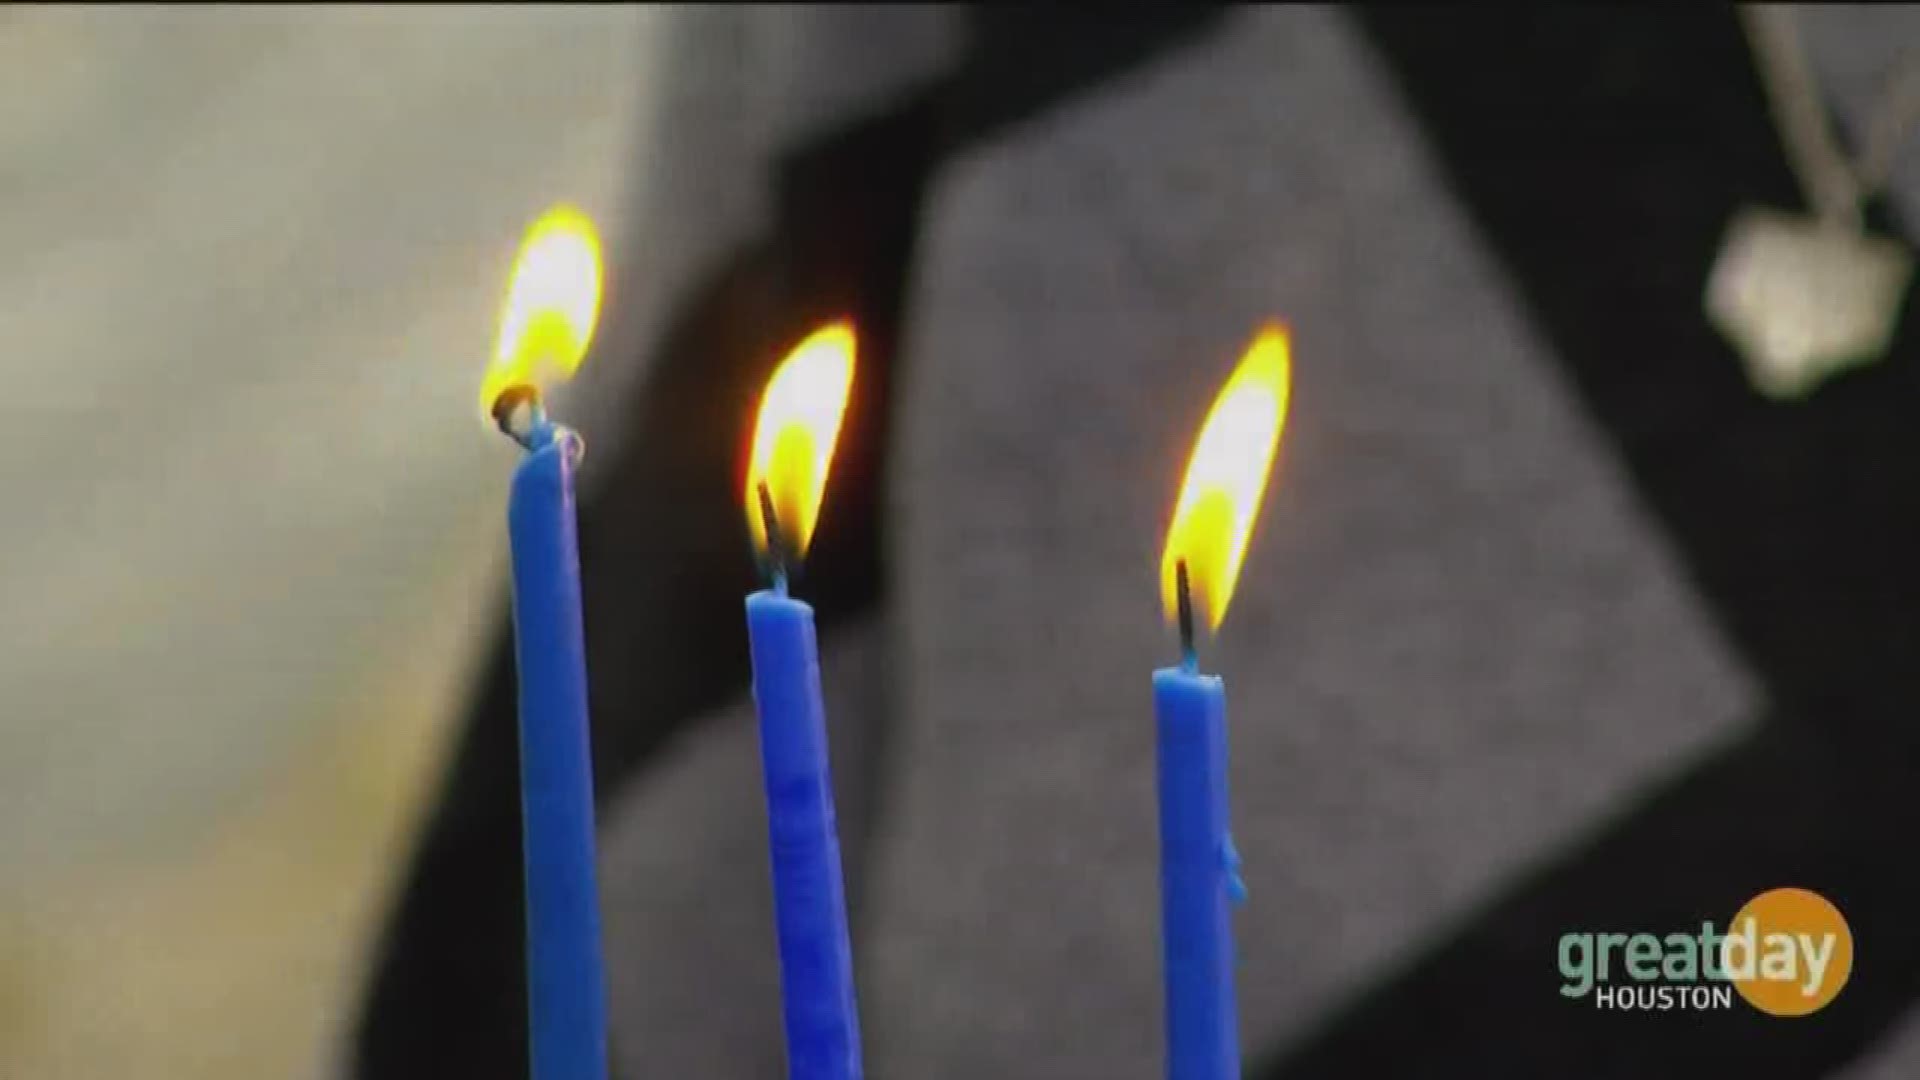 Rabbi Amy Weiss discussed traditions of Hanukkah